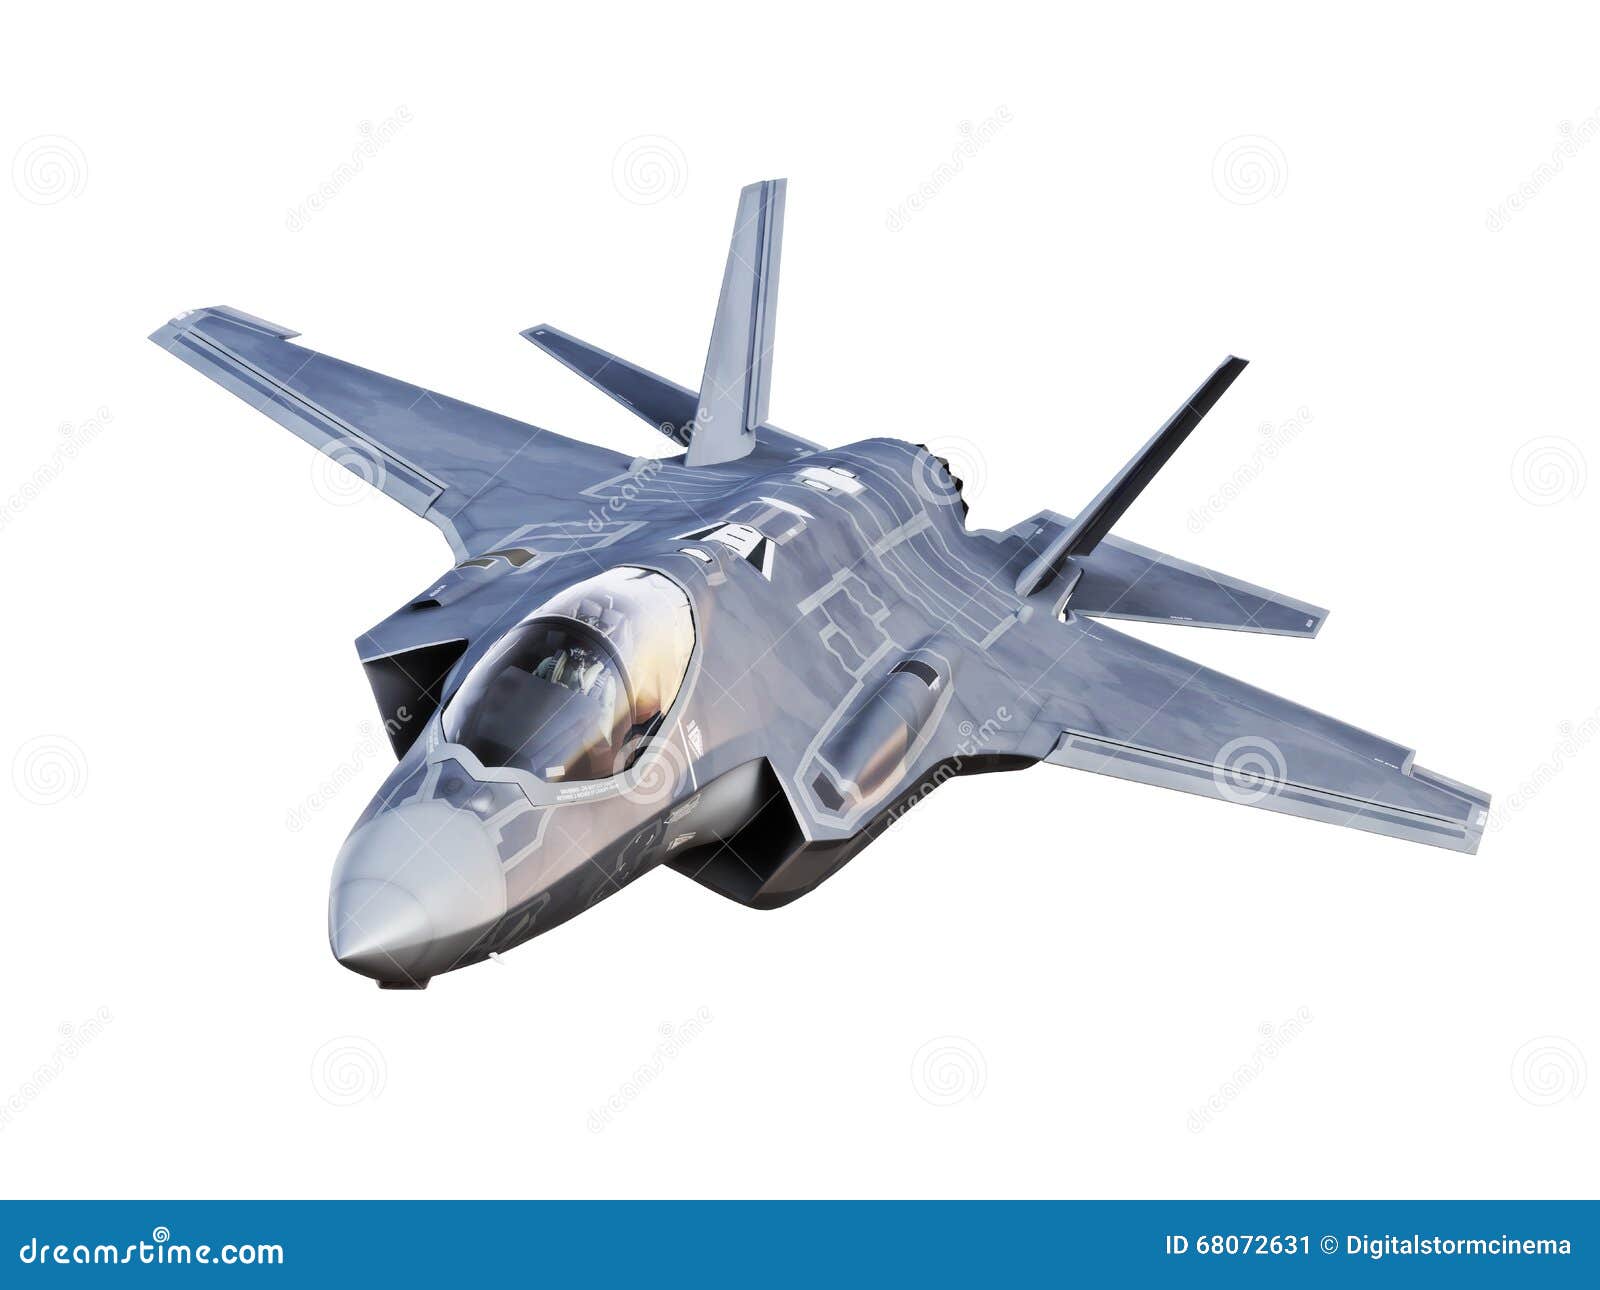 view of a f35 jet aircraft  on a white background.